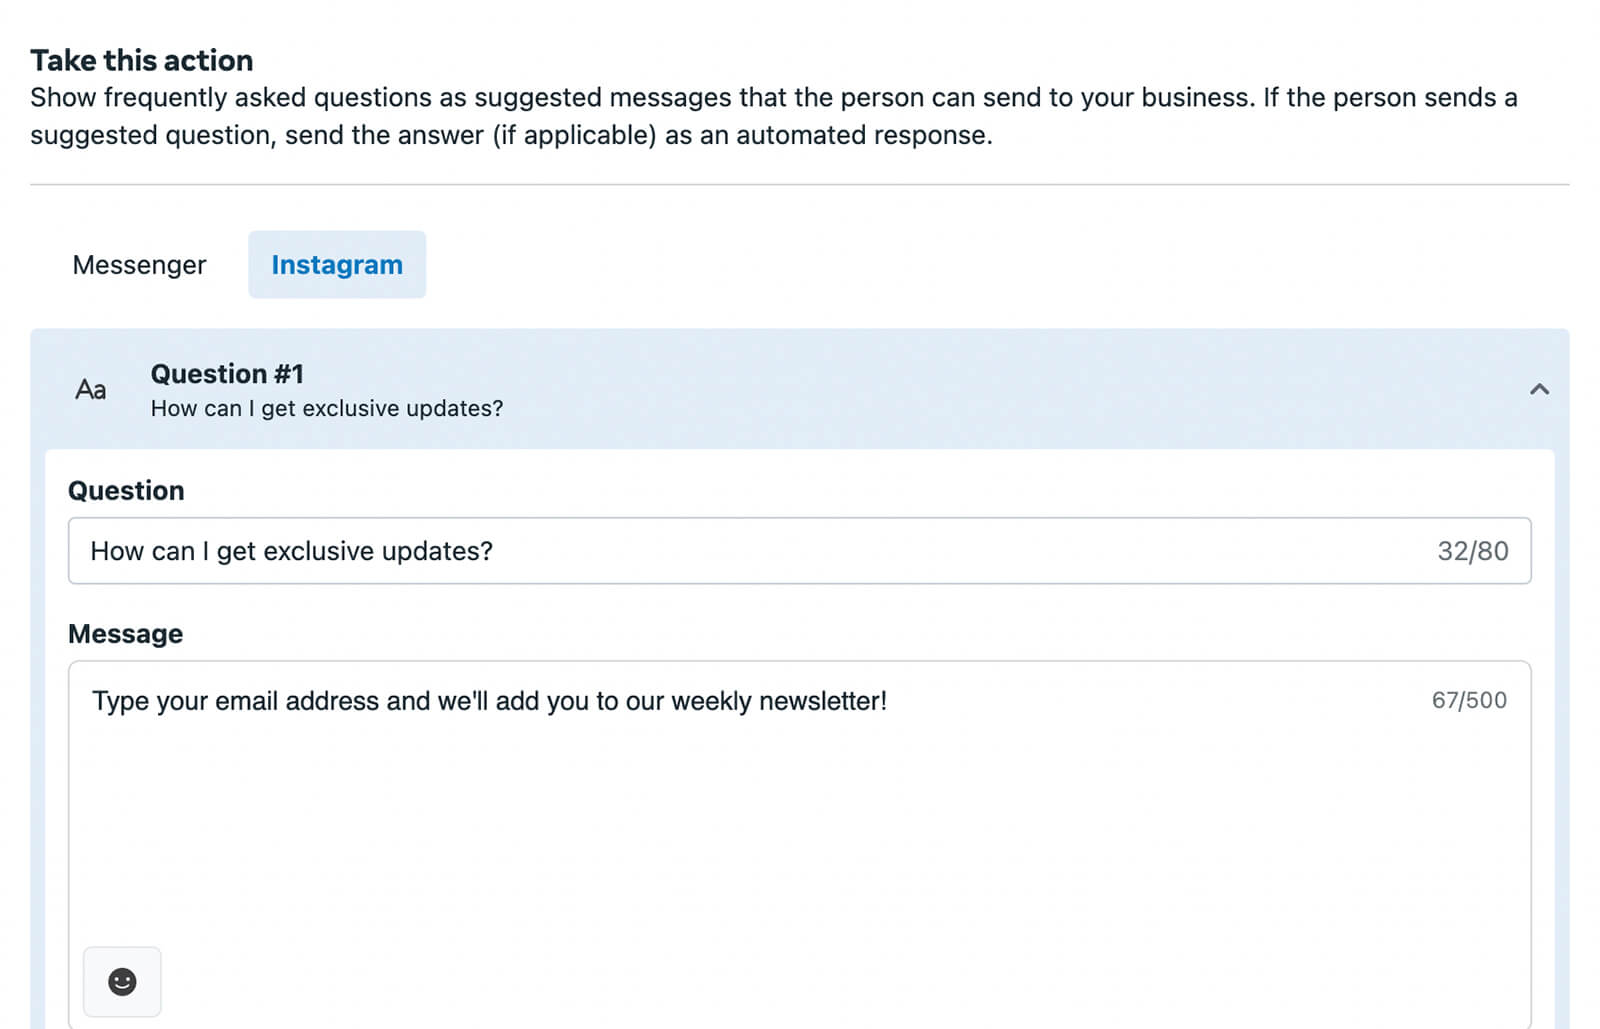 how-to-include-email-sign-up-opportunities-in-automated-dm-responses-on-your-instagram-profile-faq-inbox-automation-tool-add-questions-automated-response-marketing-goals-example-11